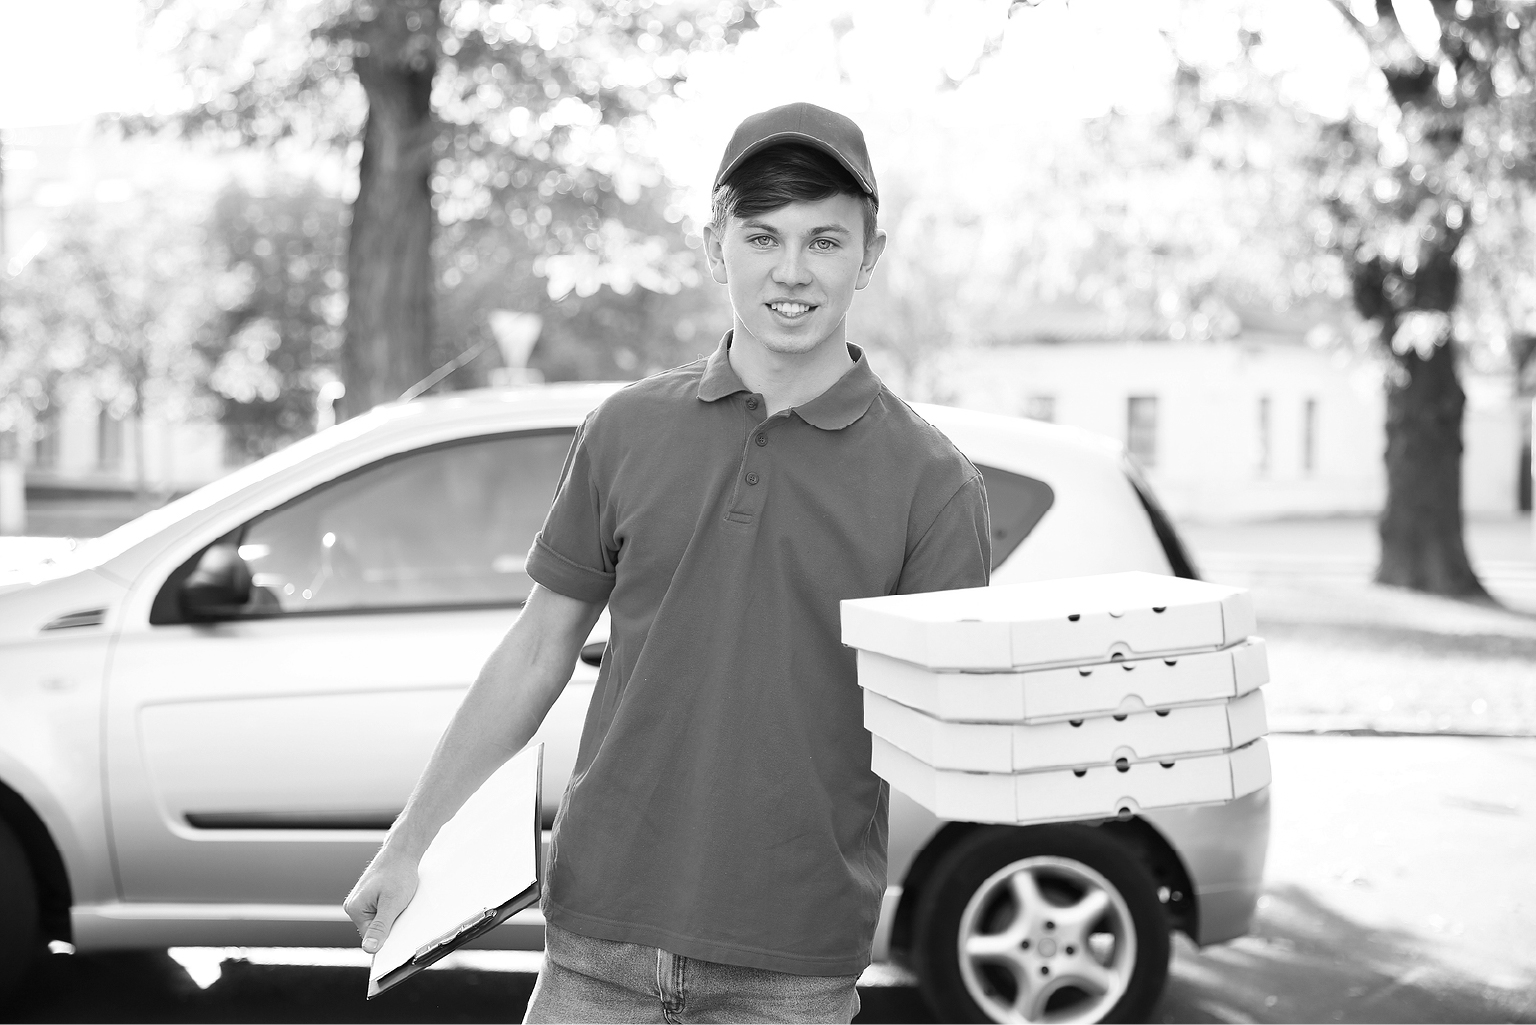 A picture of a pizza delivery boy outside his vehicle holding boxes of pizzas.